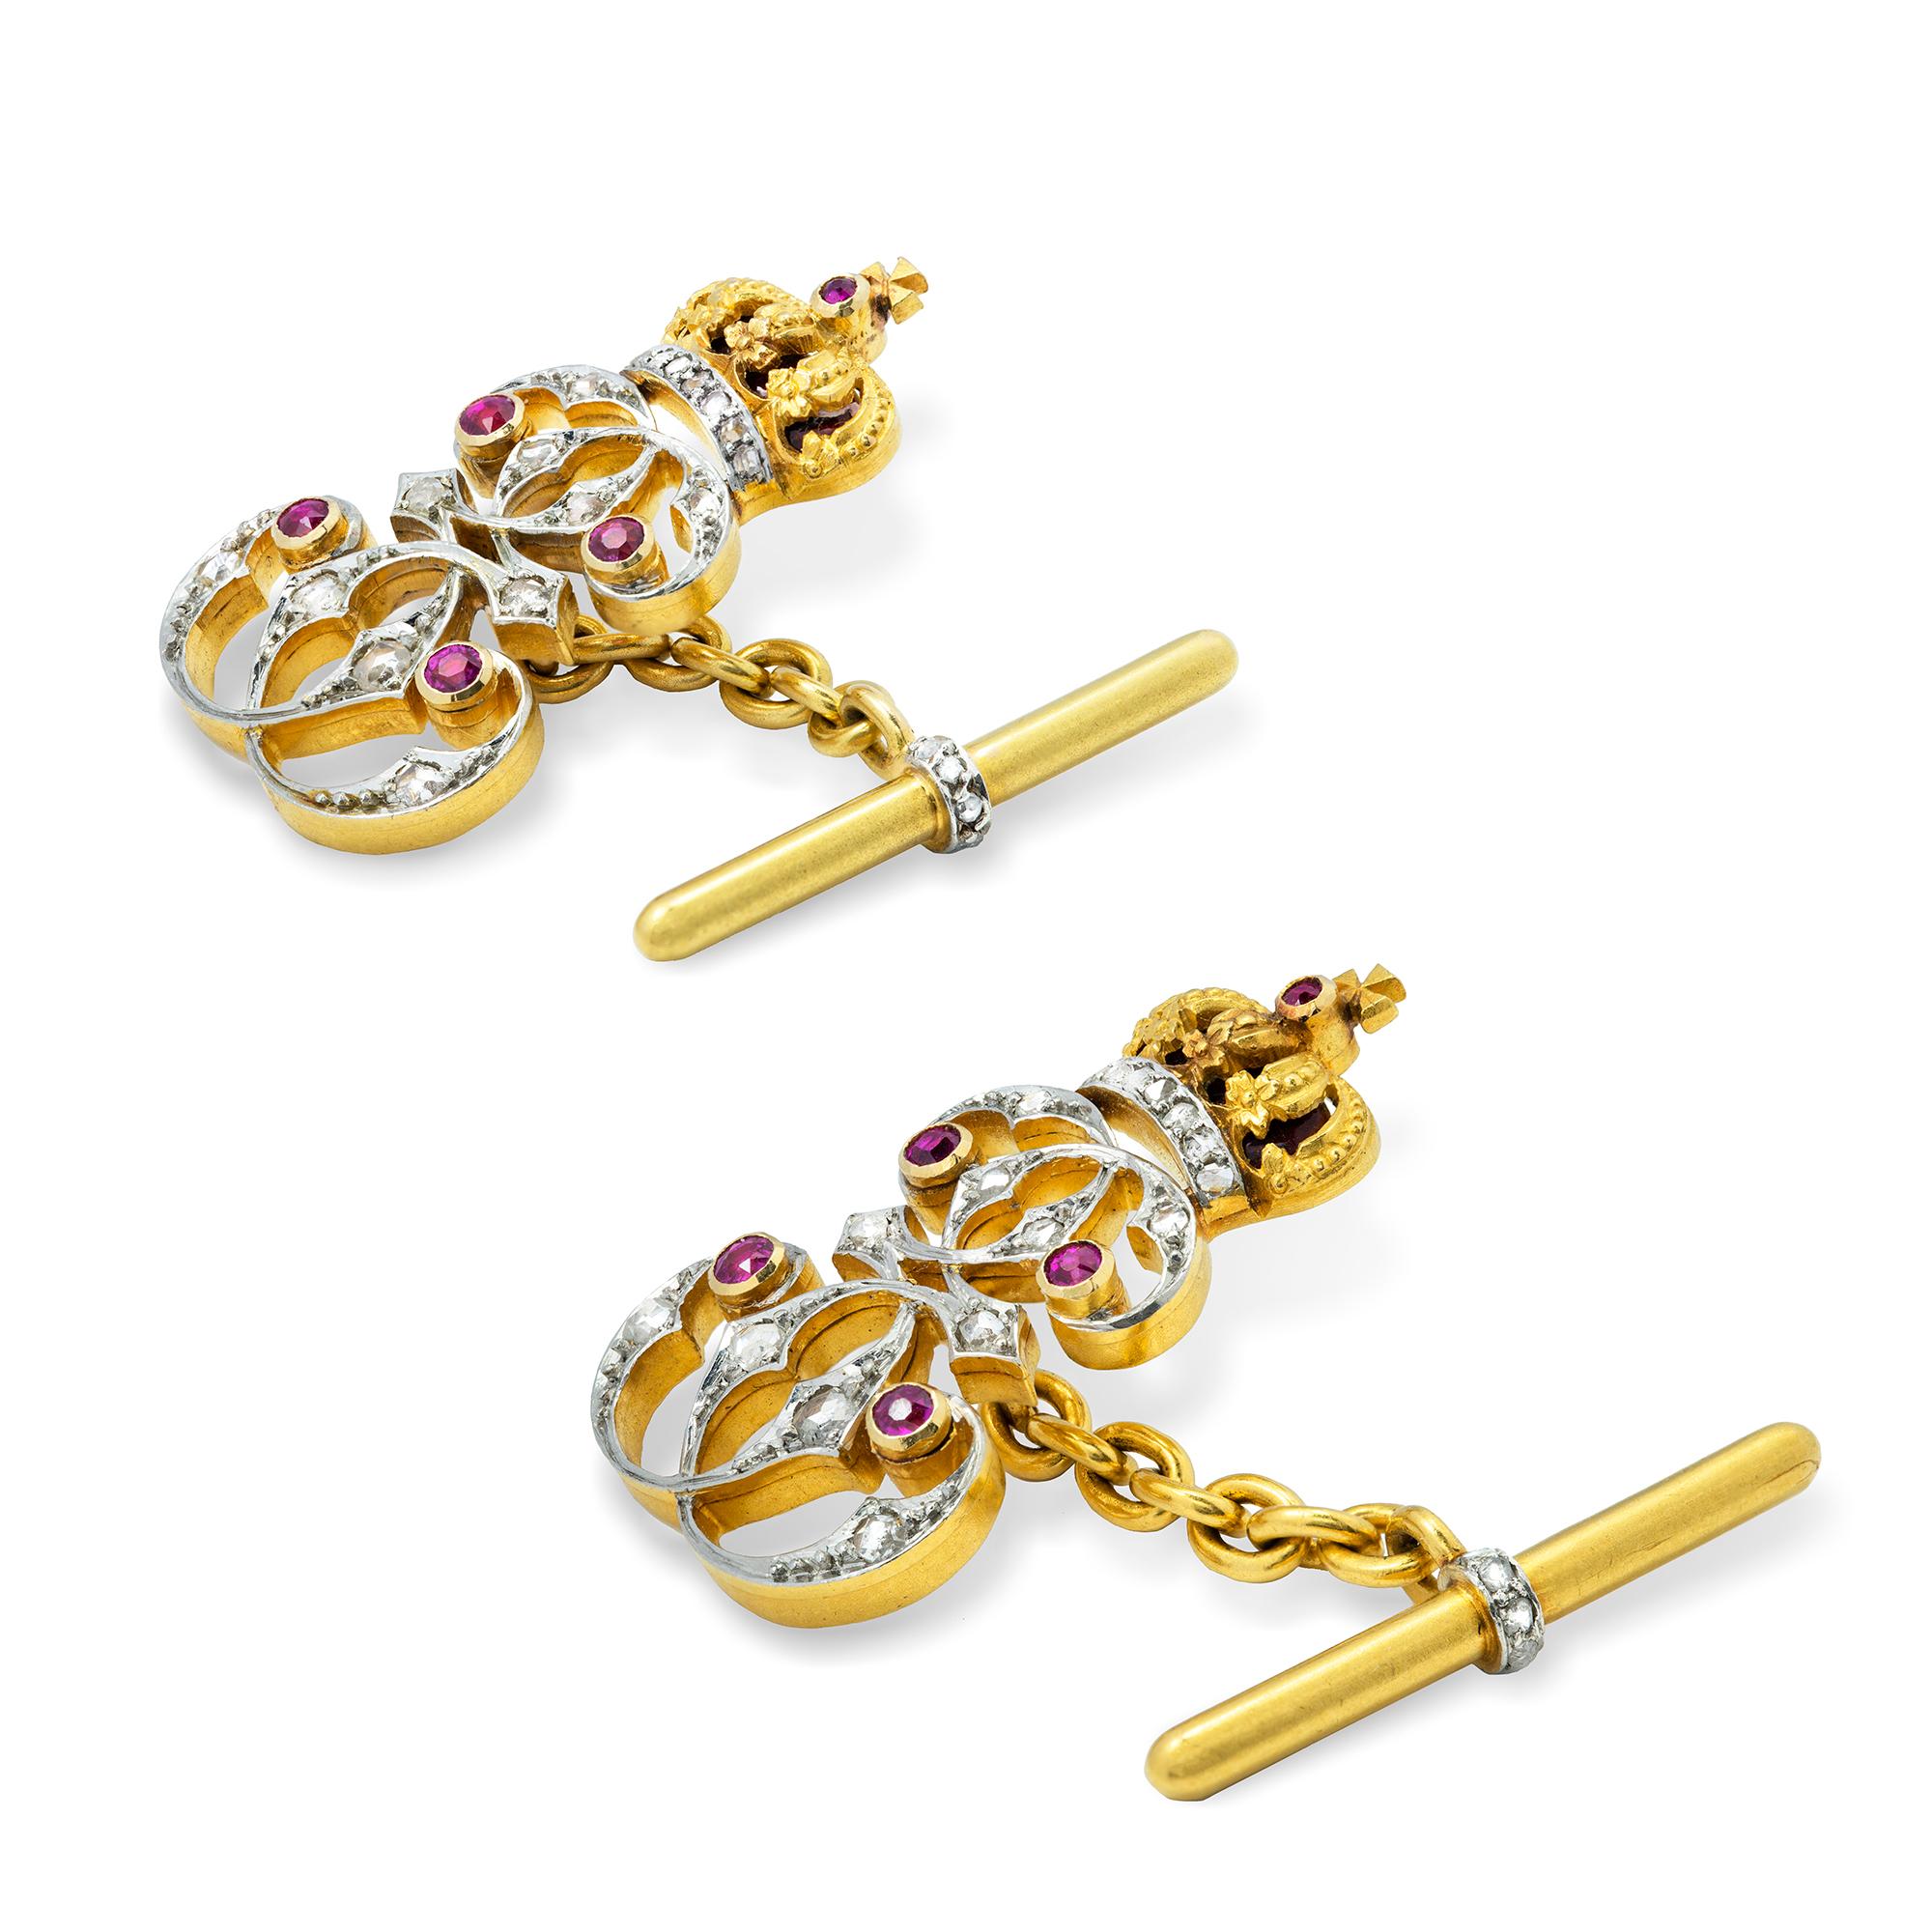 A pair of Queen Elizabeth of Romania presentation cufflinks, the Queen’s cypher encrusted with rose-cut diamonds and rubies set in platinum, with red guilloche enamel decoration on the crown, linked to a cufflink chain and a gold bar with a rose-cut